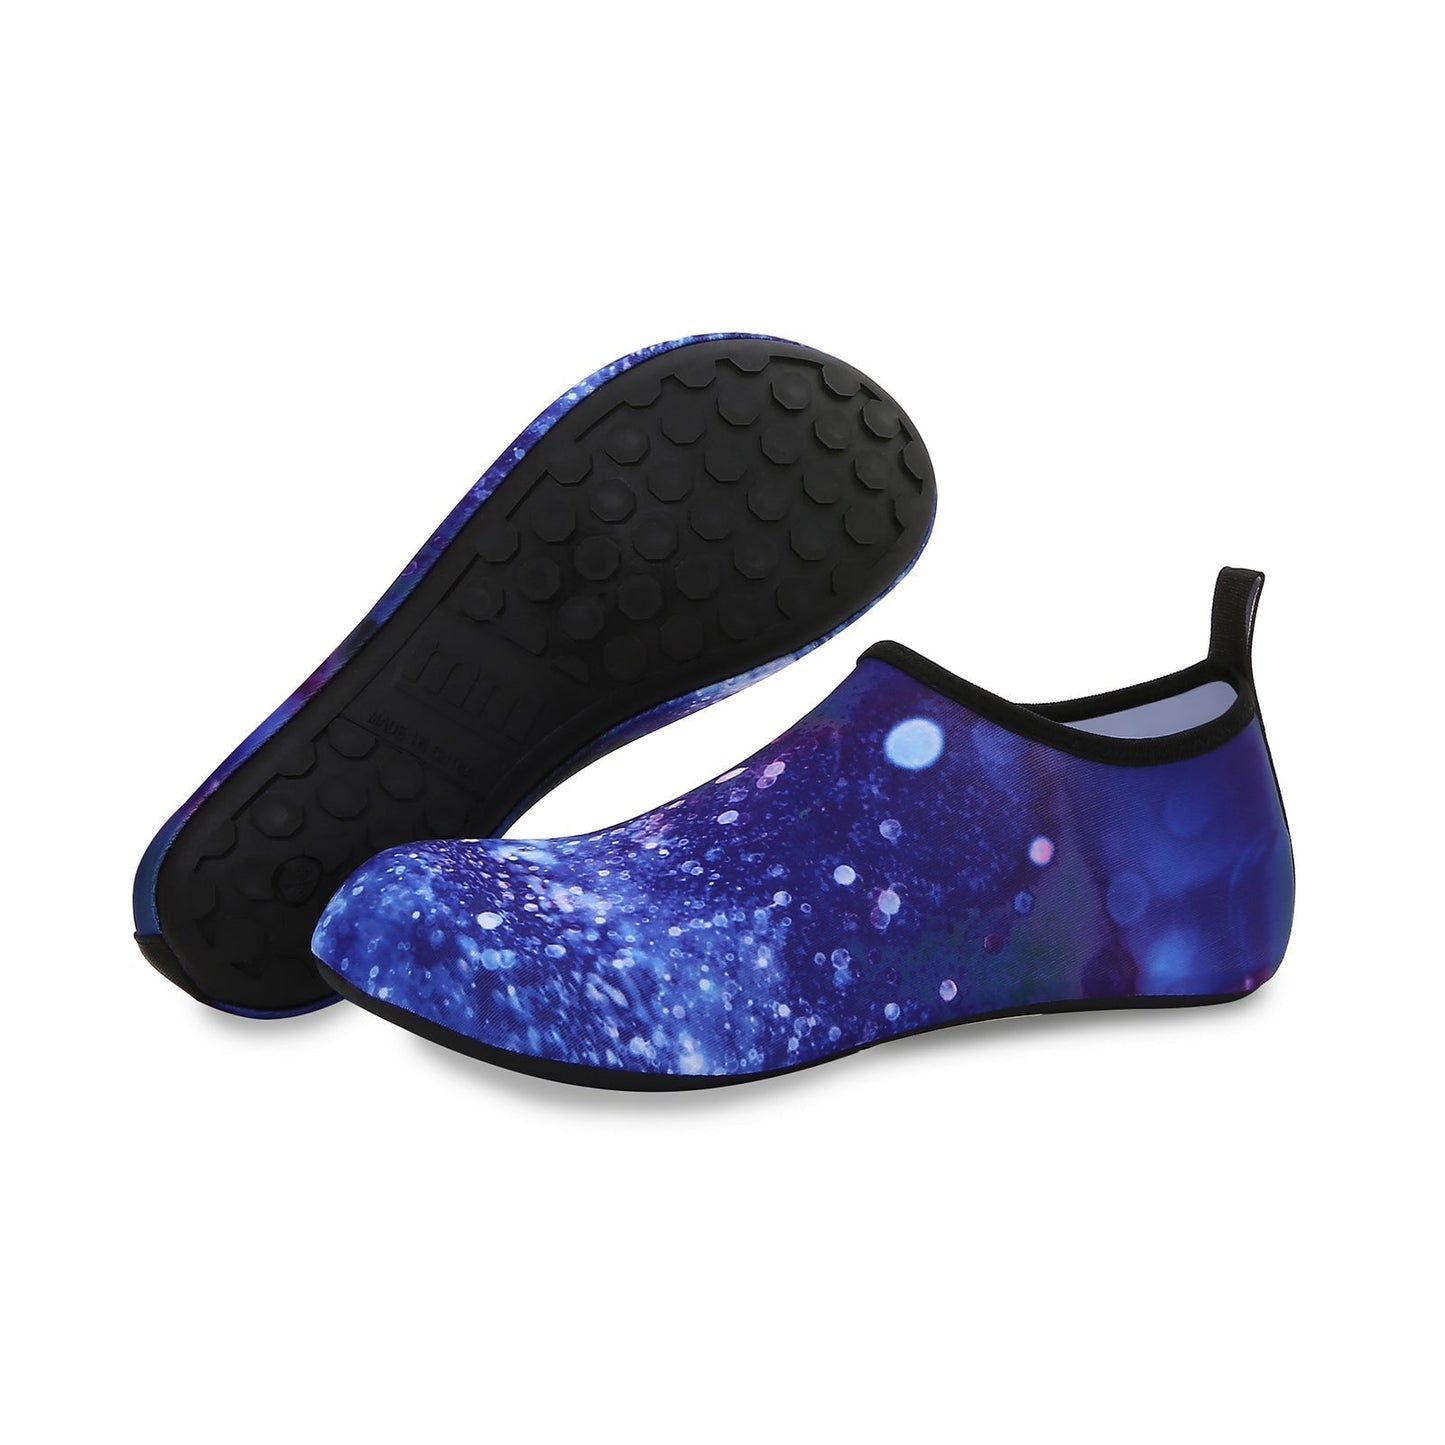 Men and Women a Slip On Barefoot Quick-Dry Beach Aqua Yoga Water Shoes (Moon Sky/Navy)